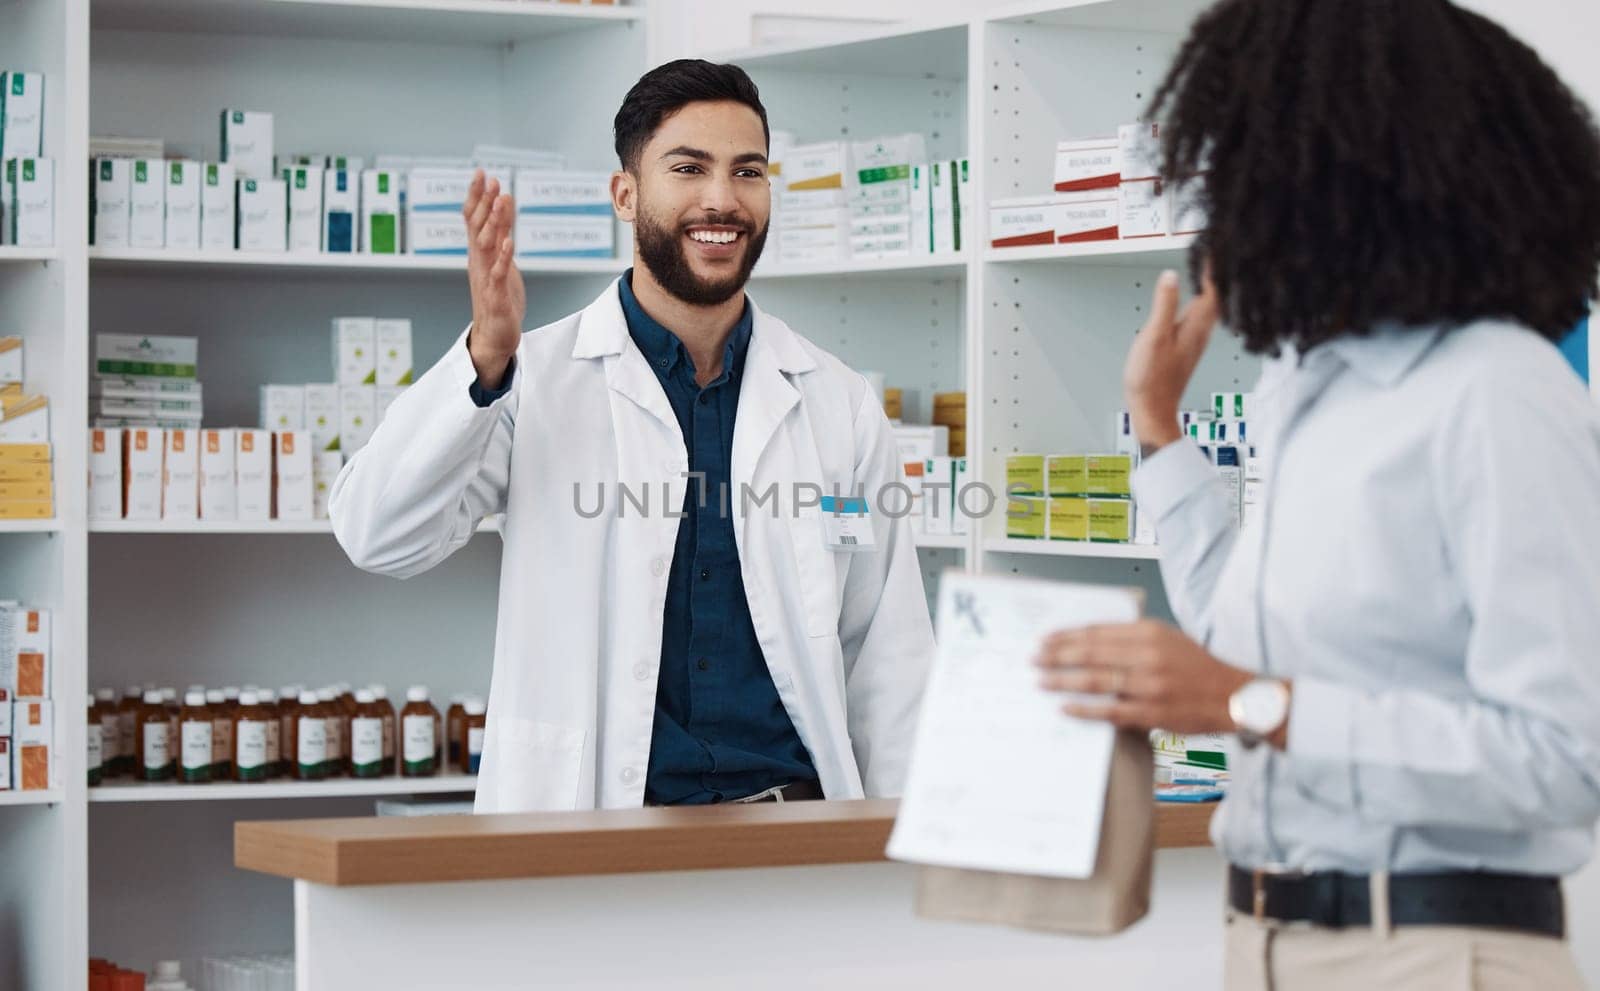 Customer service, counter and pharmacist man with medicine, expert advice or healthcare support. Happy doctor, medical professional or friendly retail person in pharmacy talking to woman at help desk.